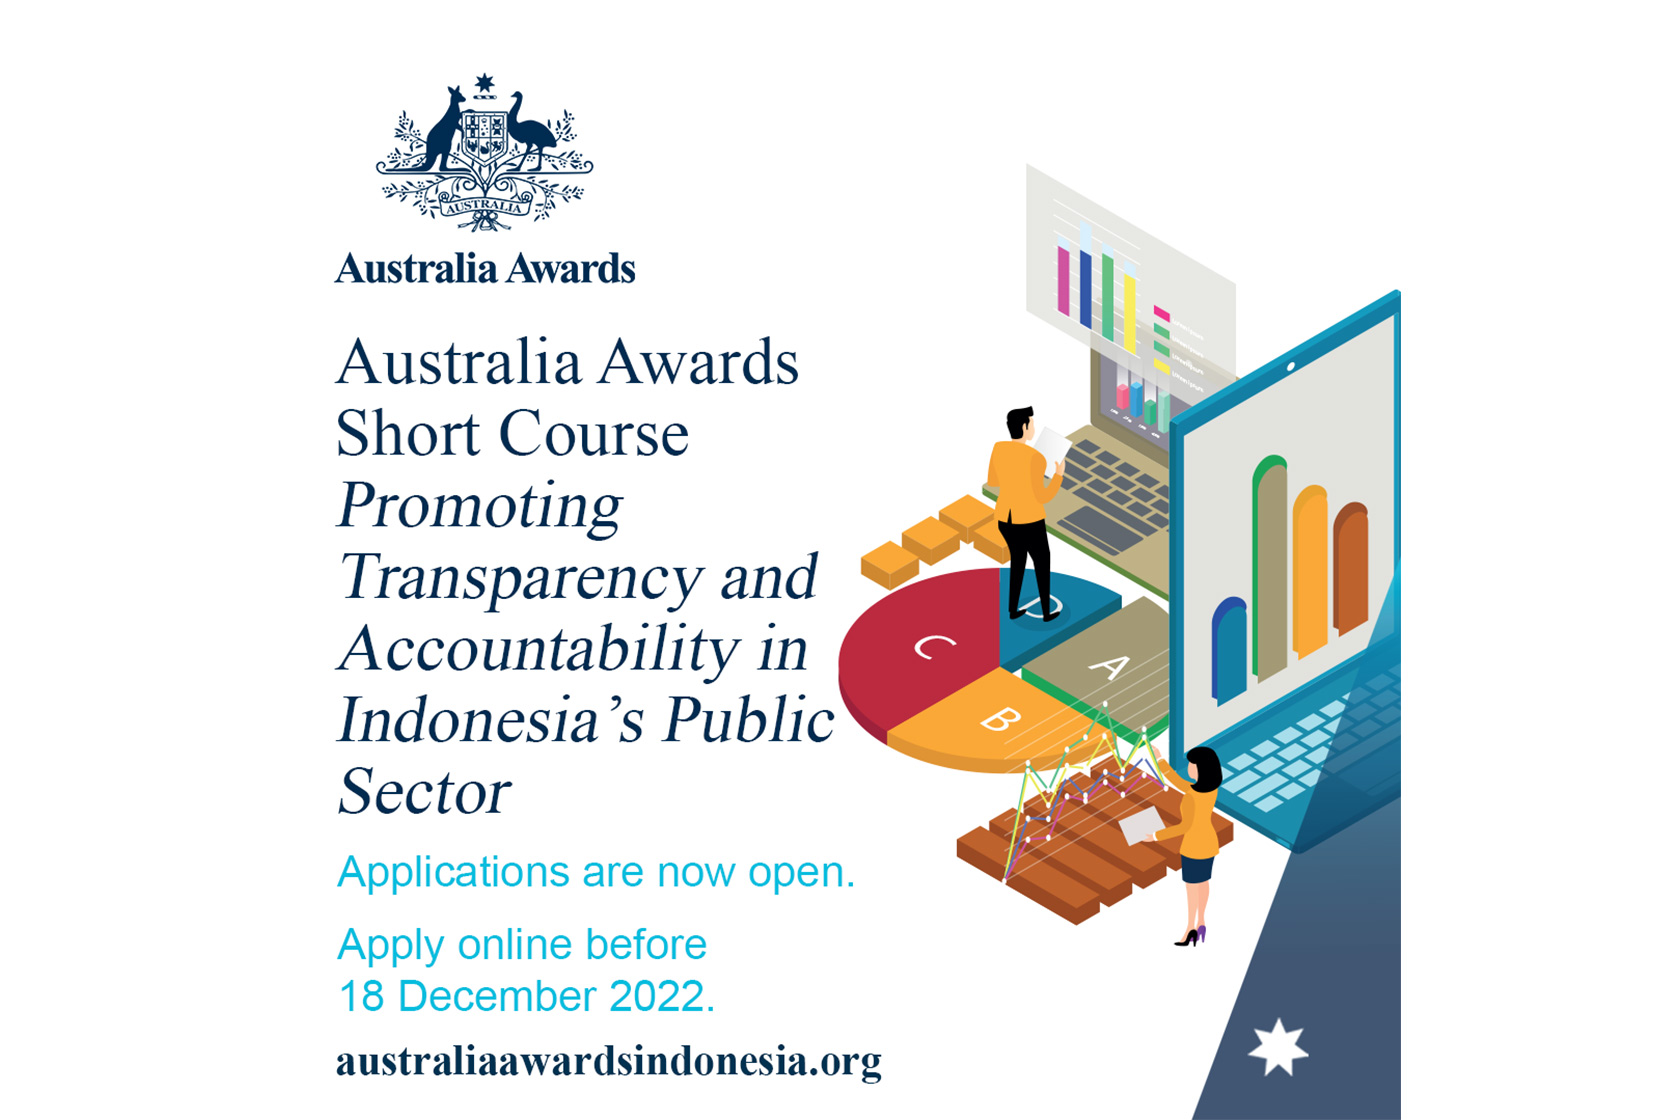 Apply Now for the Australia Awards Short Course on Promoting Transparency and Accountability in Indonesia's Public Sector